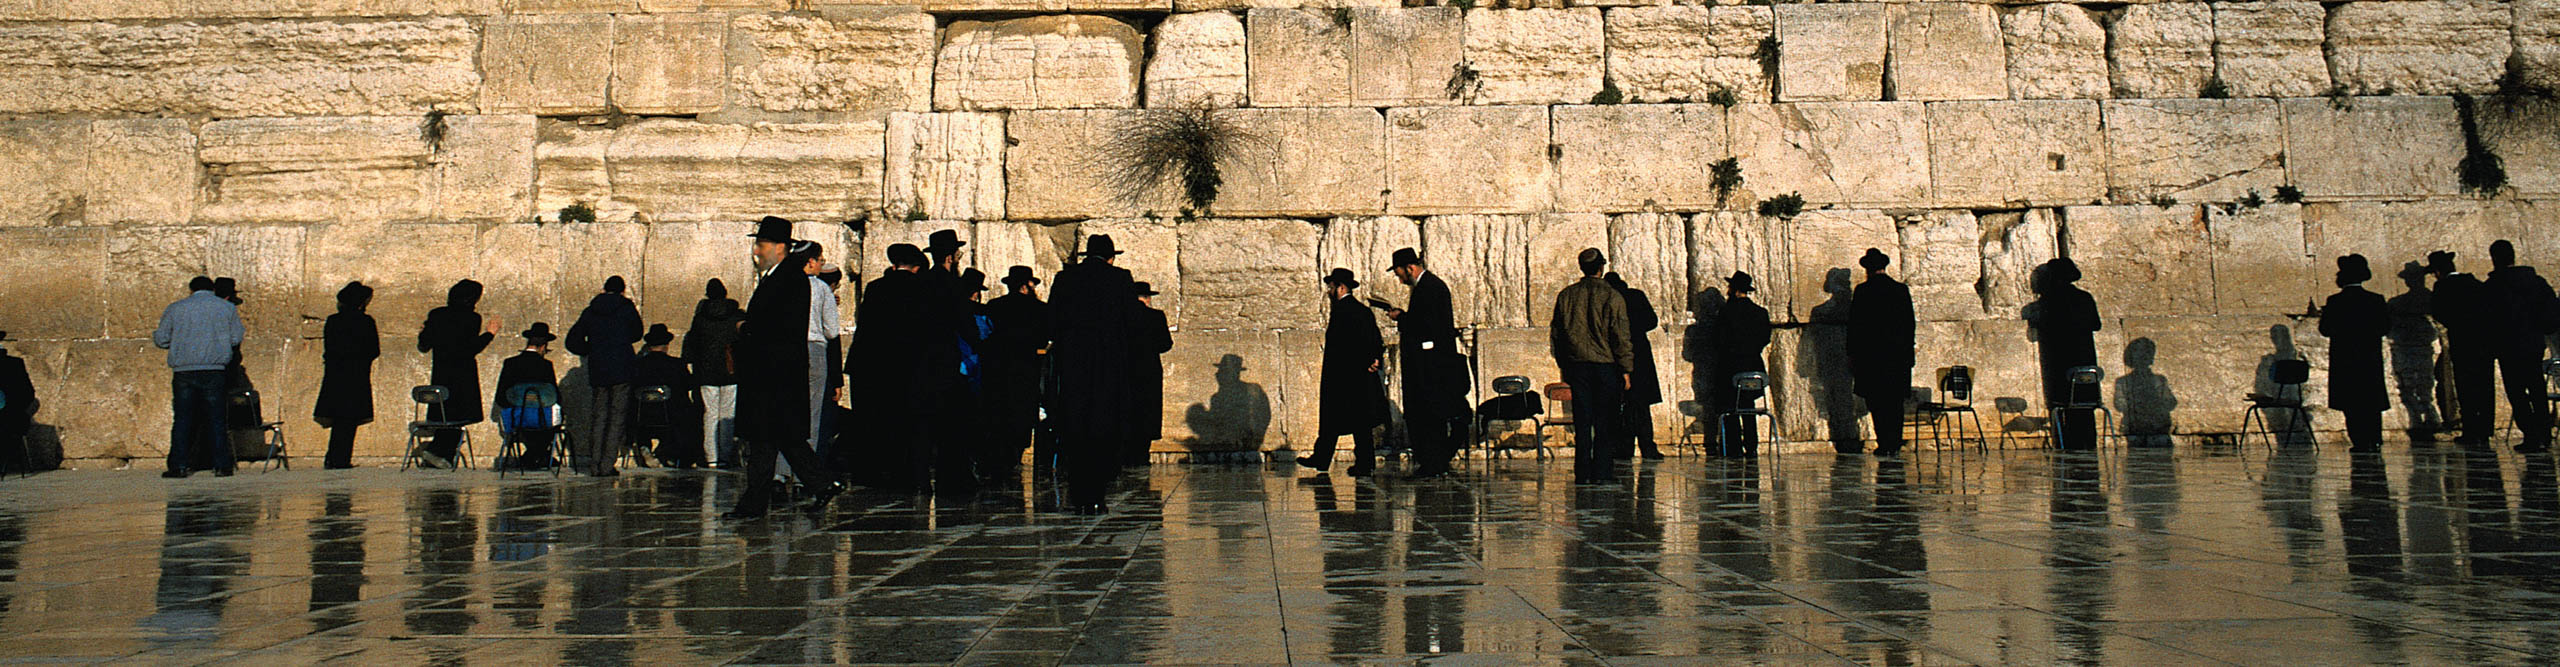 Jewish men standing in front of the Wailing Wall, at the Western temple in Jerusalem 